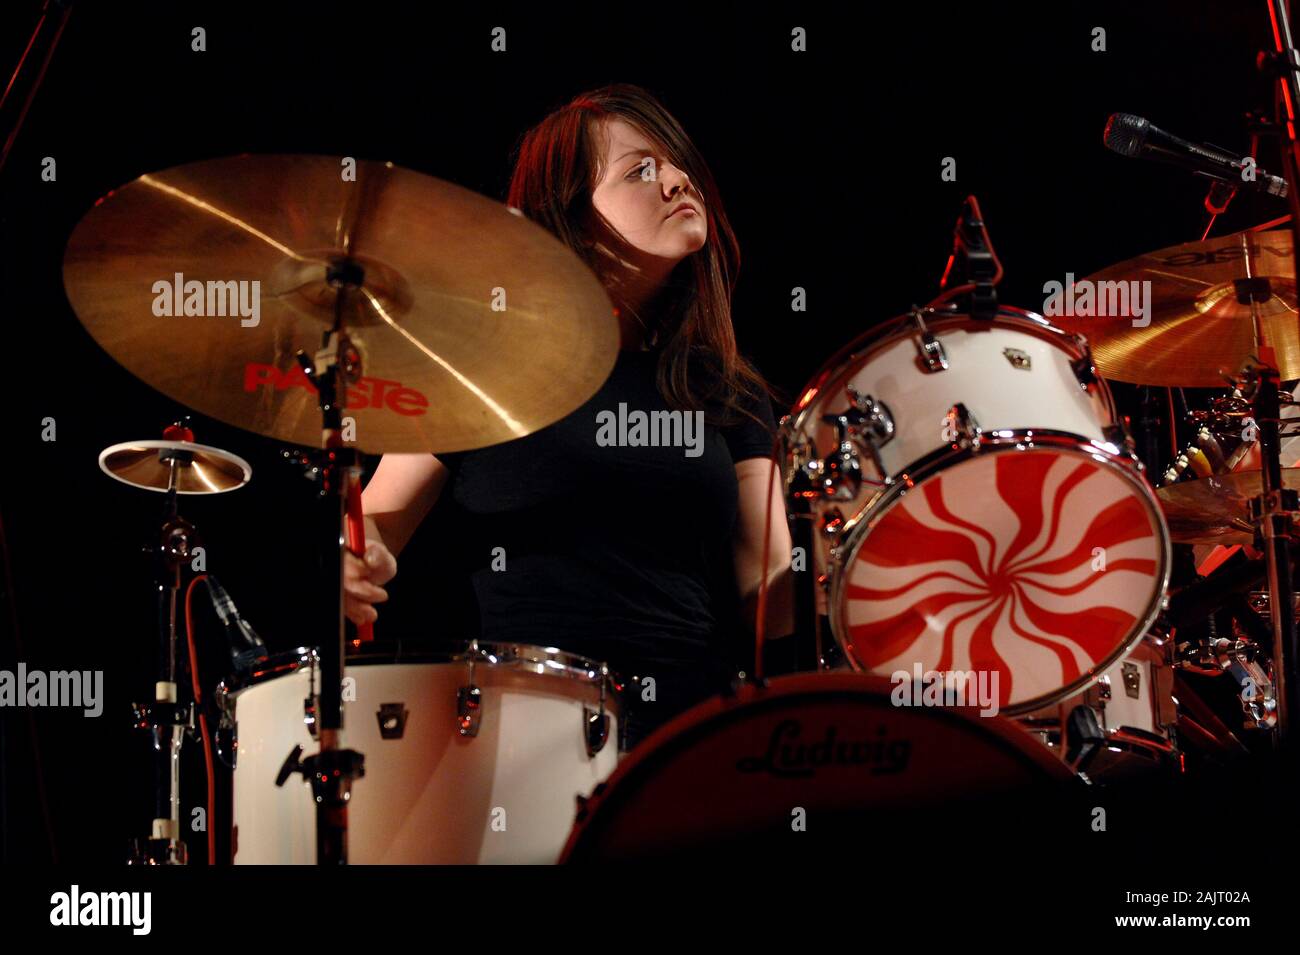 Milan Italy  07 June 2007,Live concert of The White Stripes at the Idorscalo: The  drummer of The White Stripes,Meg White,during the concert Stock Photo